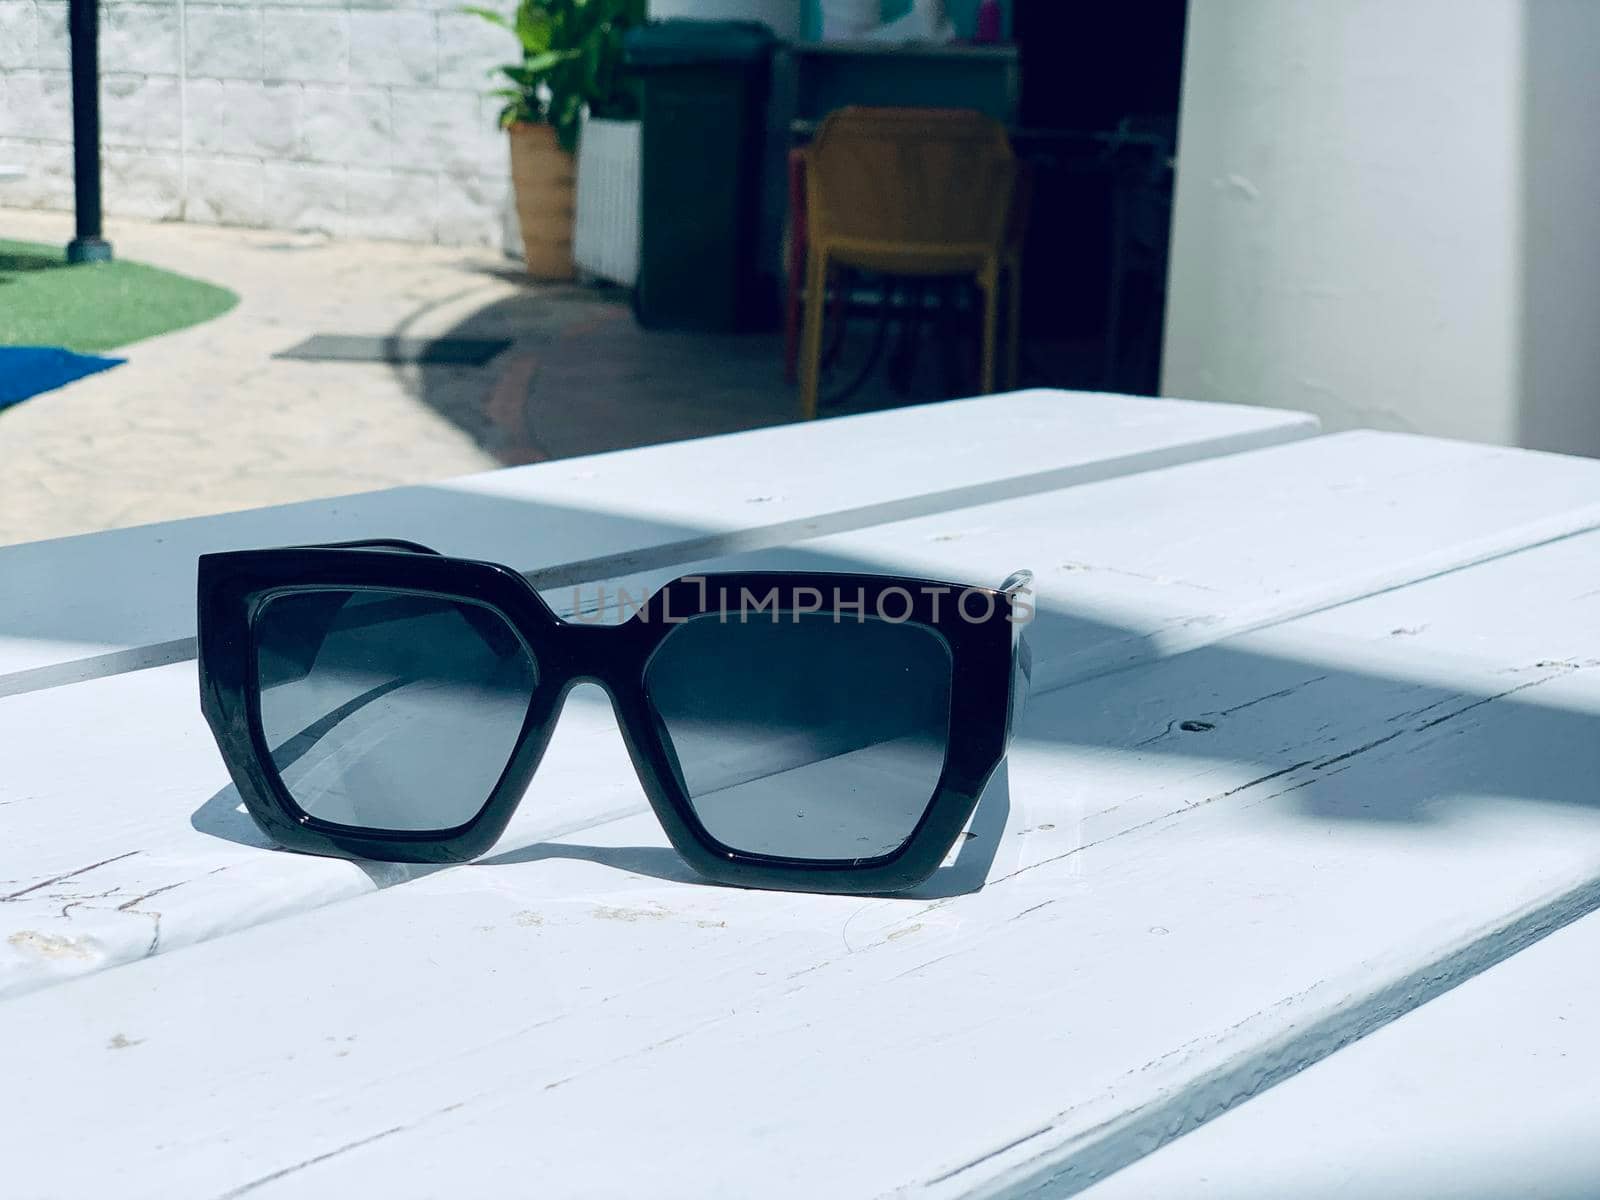 fashion sunglasses black on white wooden table. Vintage color style by juliet_summertime